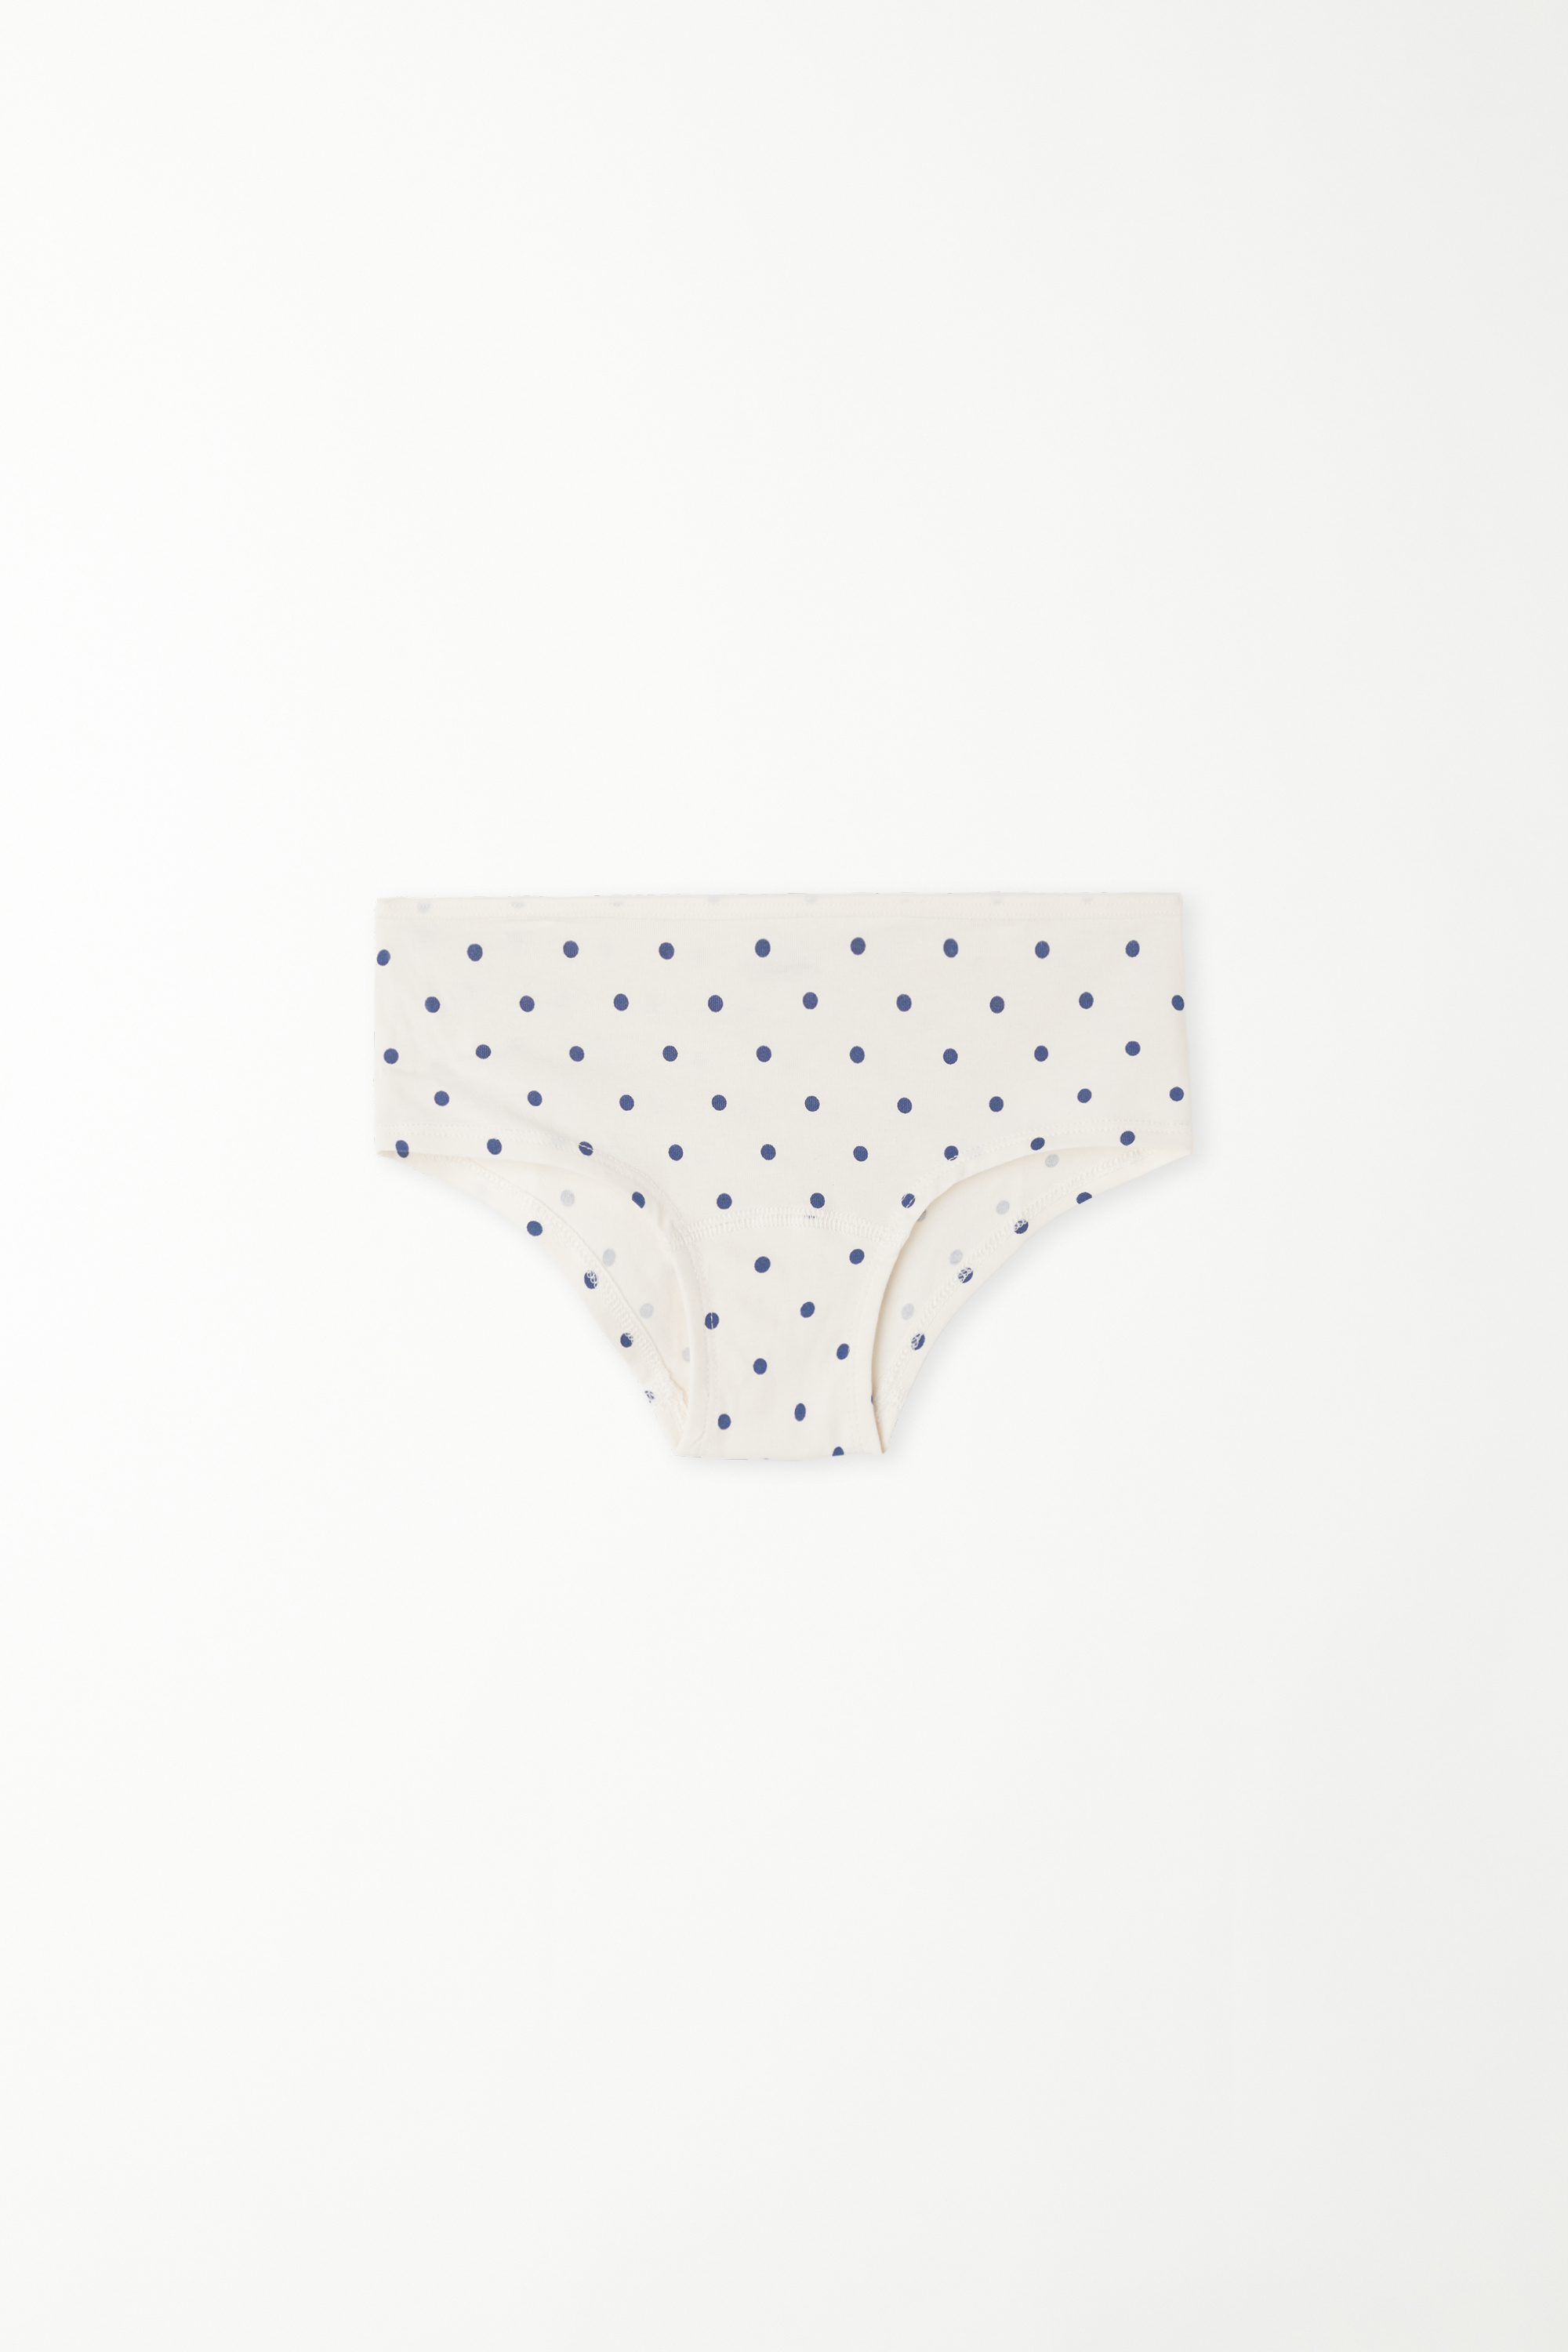 Girls’ Basic Printed Cotton French Knickers